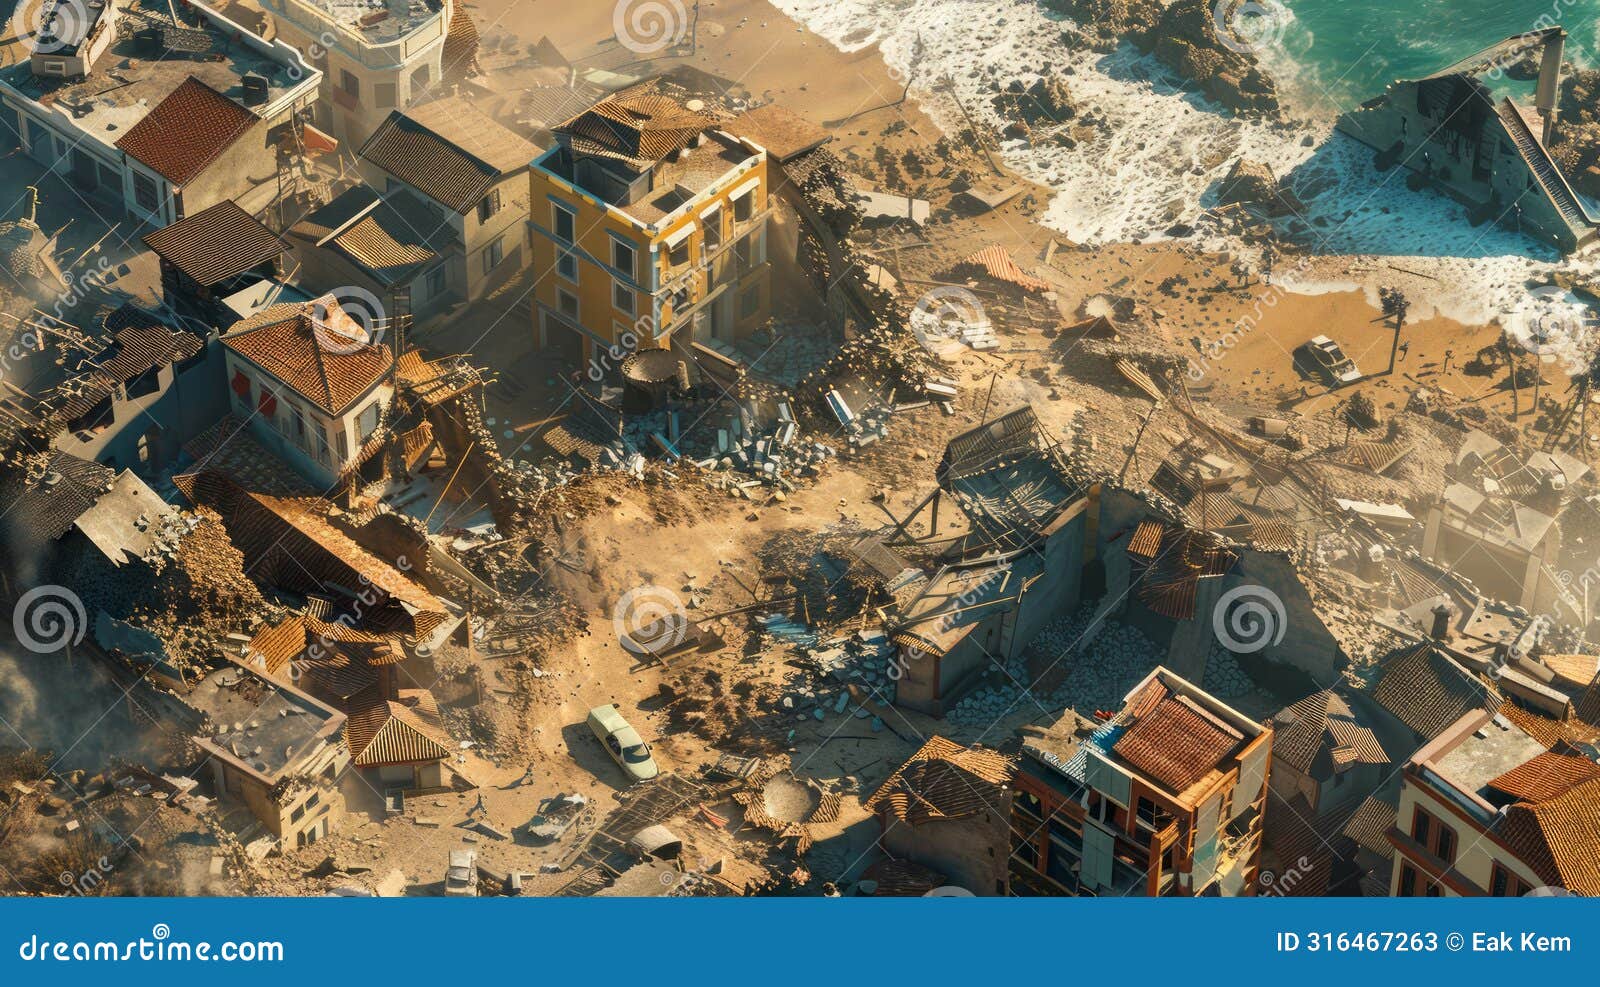 aerial view of coastal town devastation after natural disaster with collapsed buildings and debris